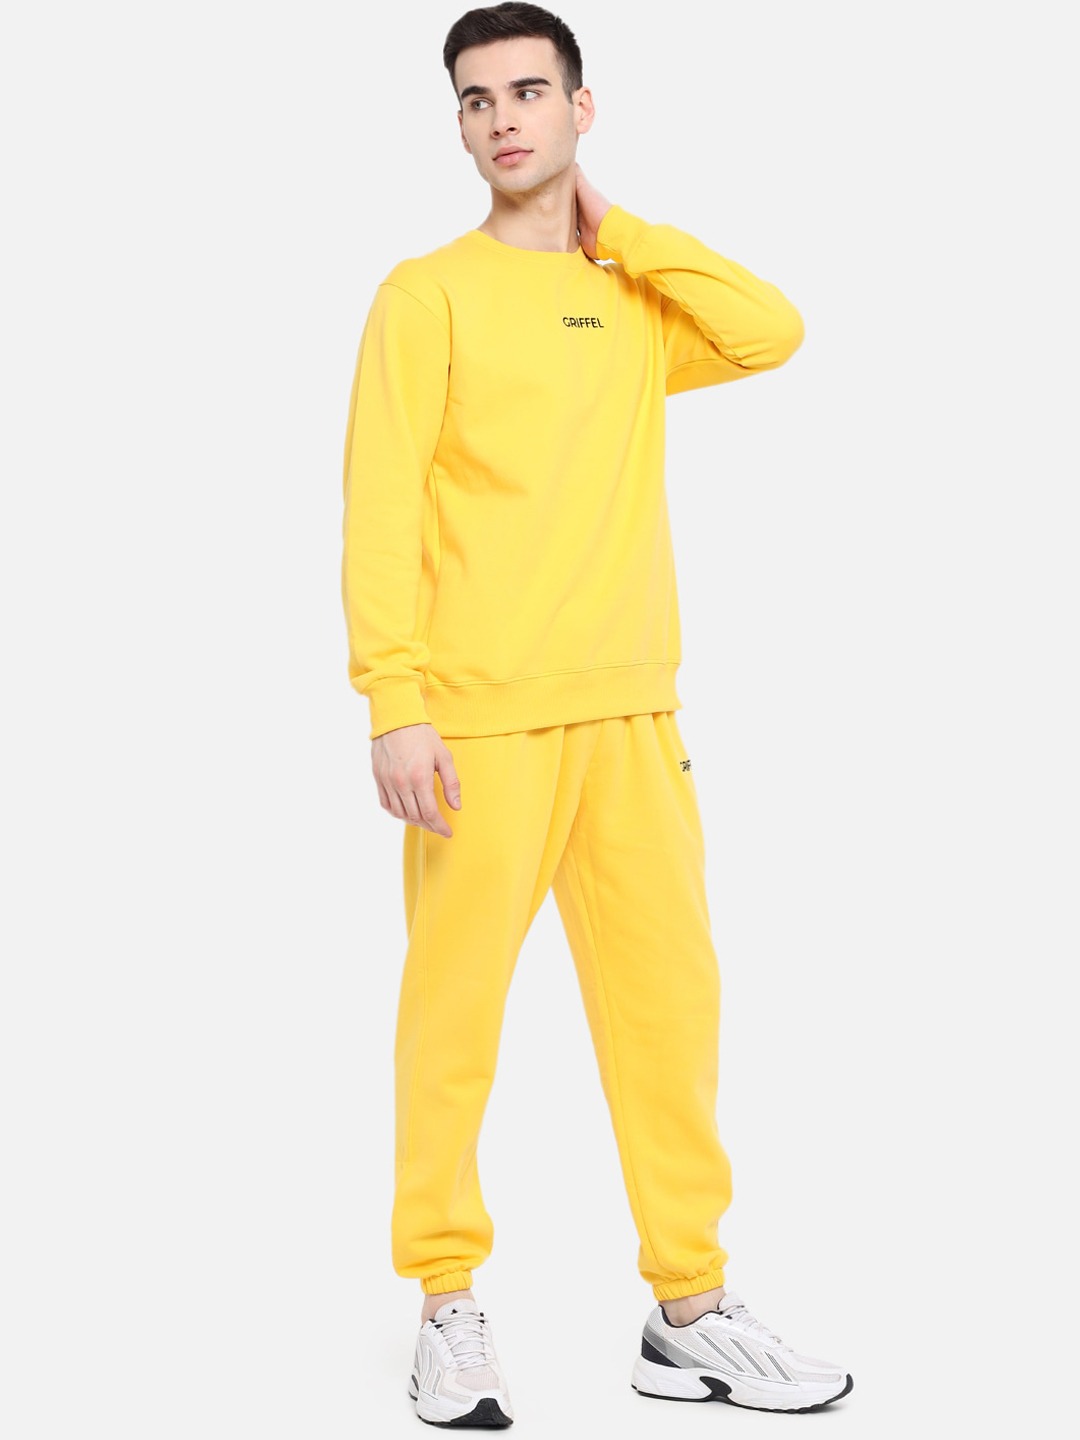 Clothing Tracksuits | GRIFFEL Men Yellow Solid Tracksuit - GU56203